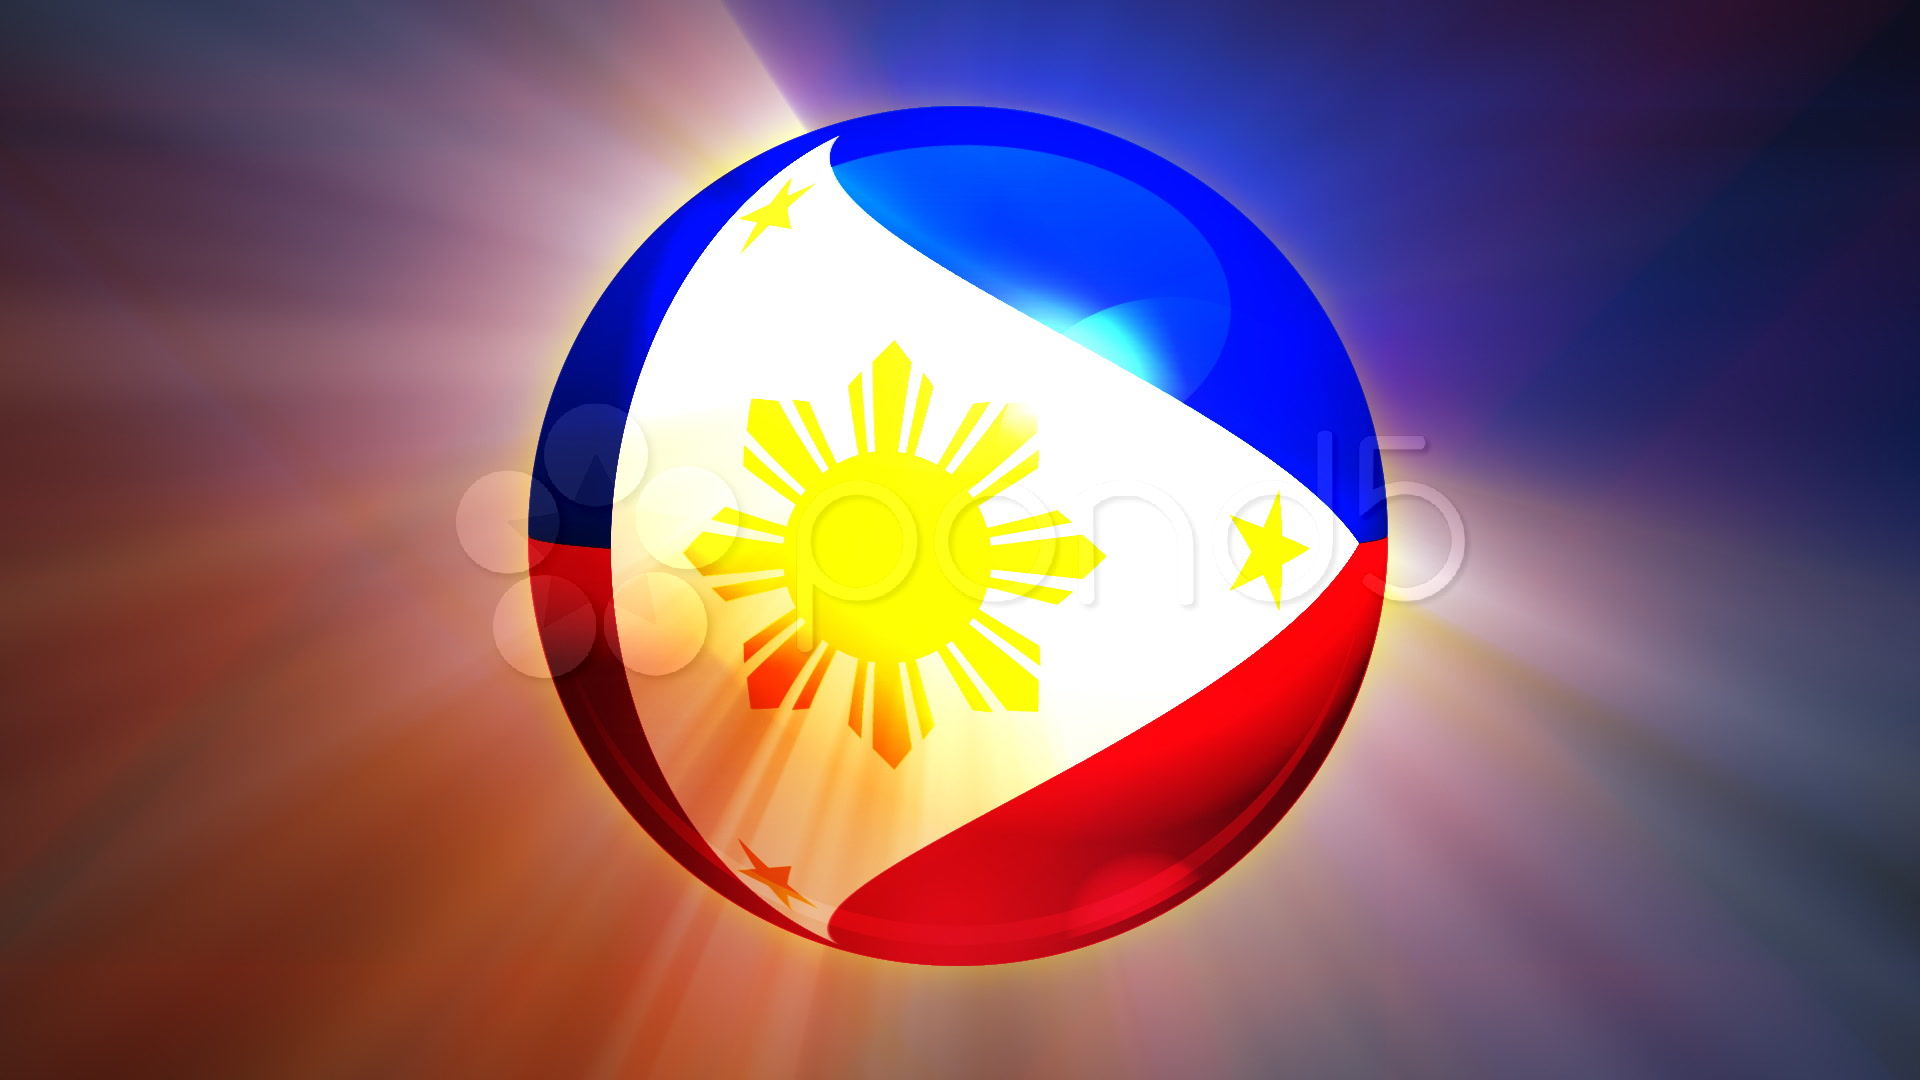 Hd Flag Of The Philippines - HD Wallpaper 